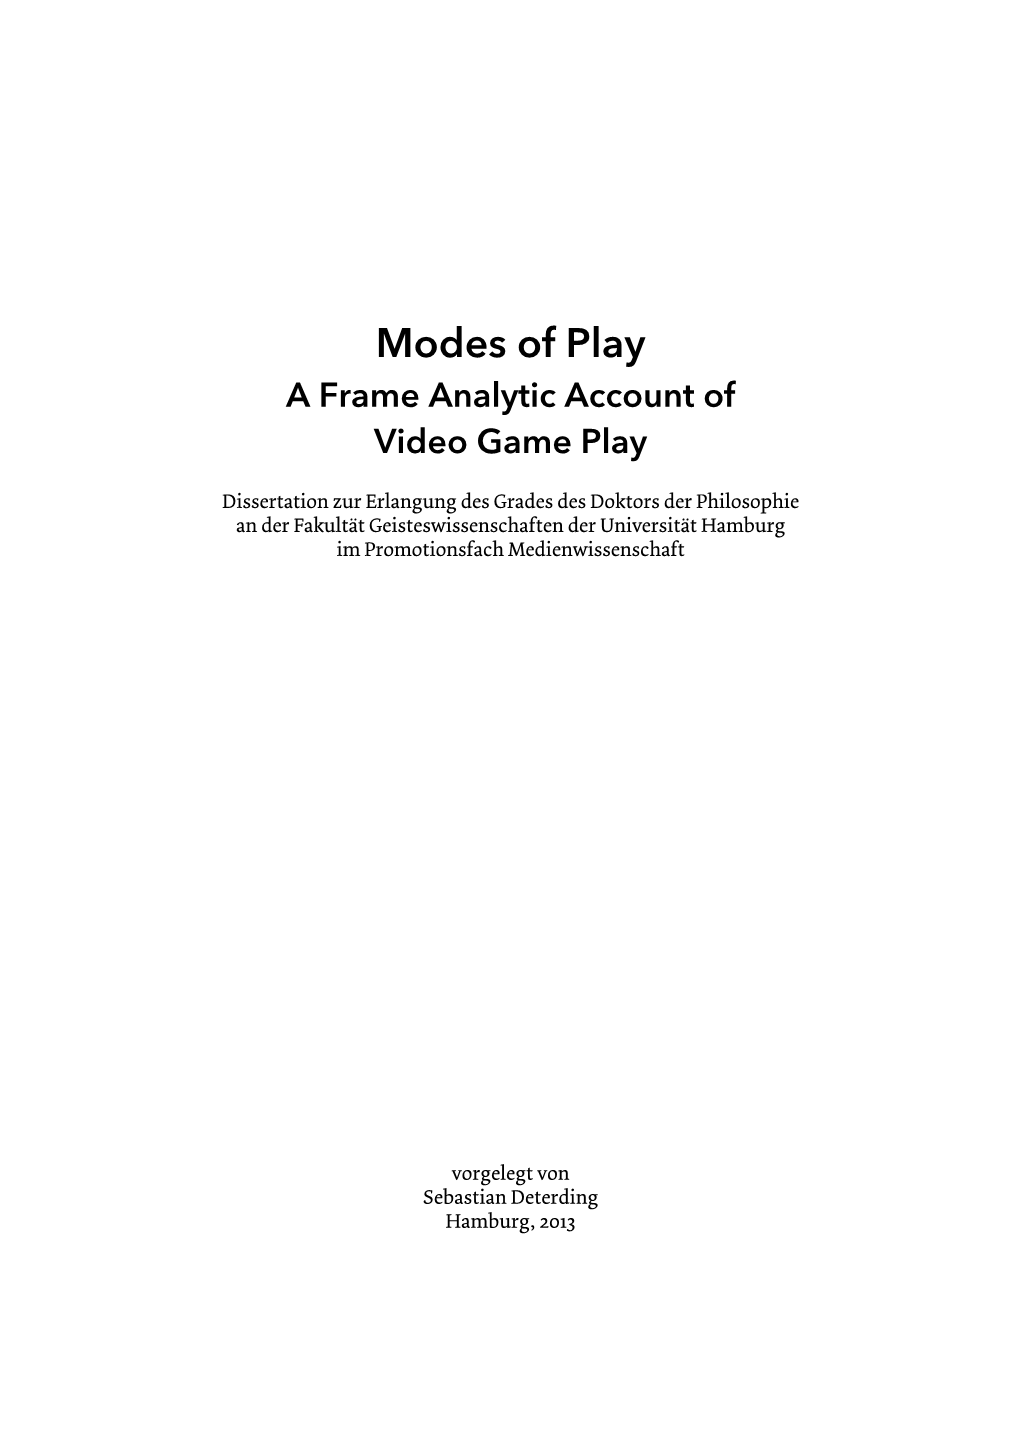 Modes of Play a Frame Analytic Account of Video Game Play